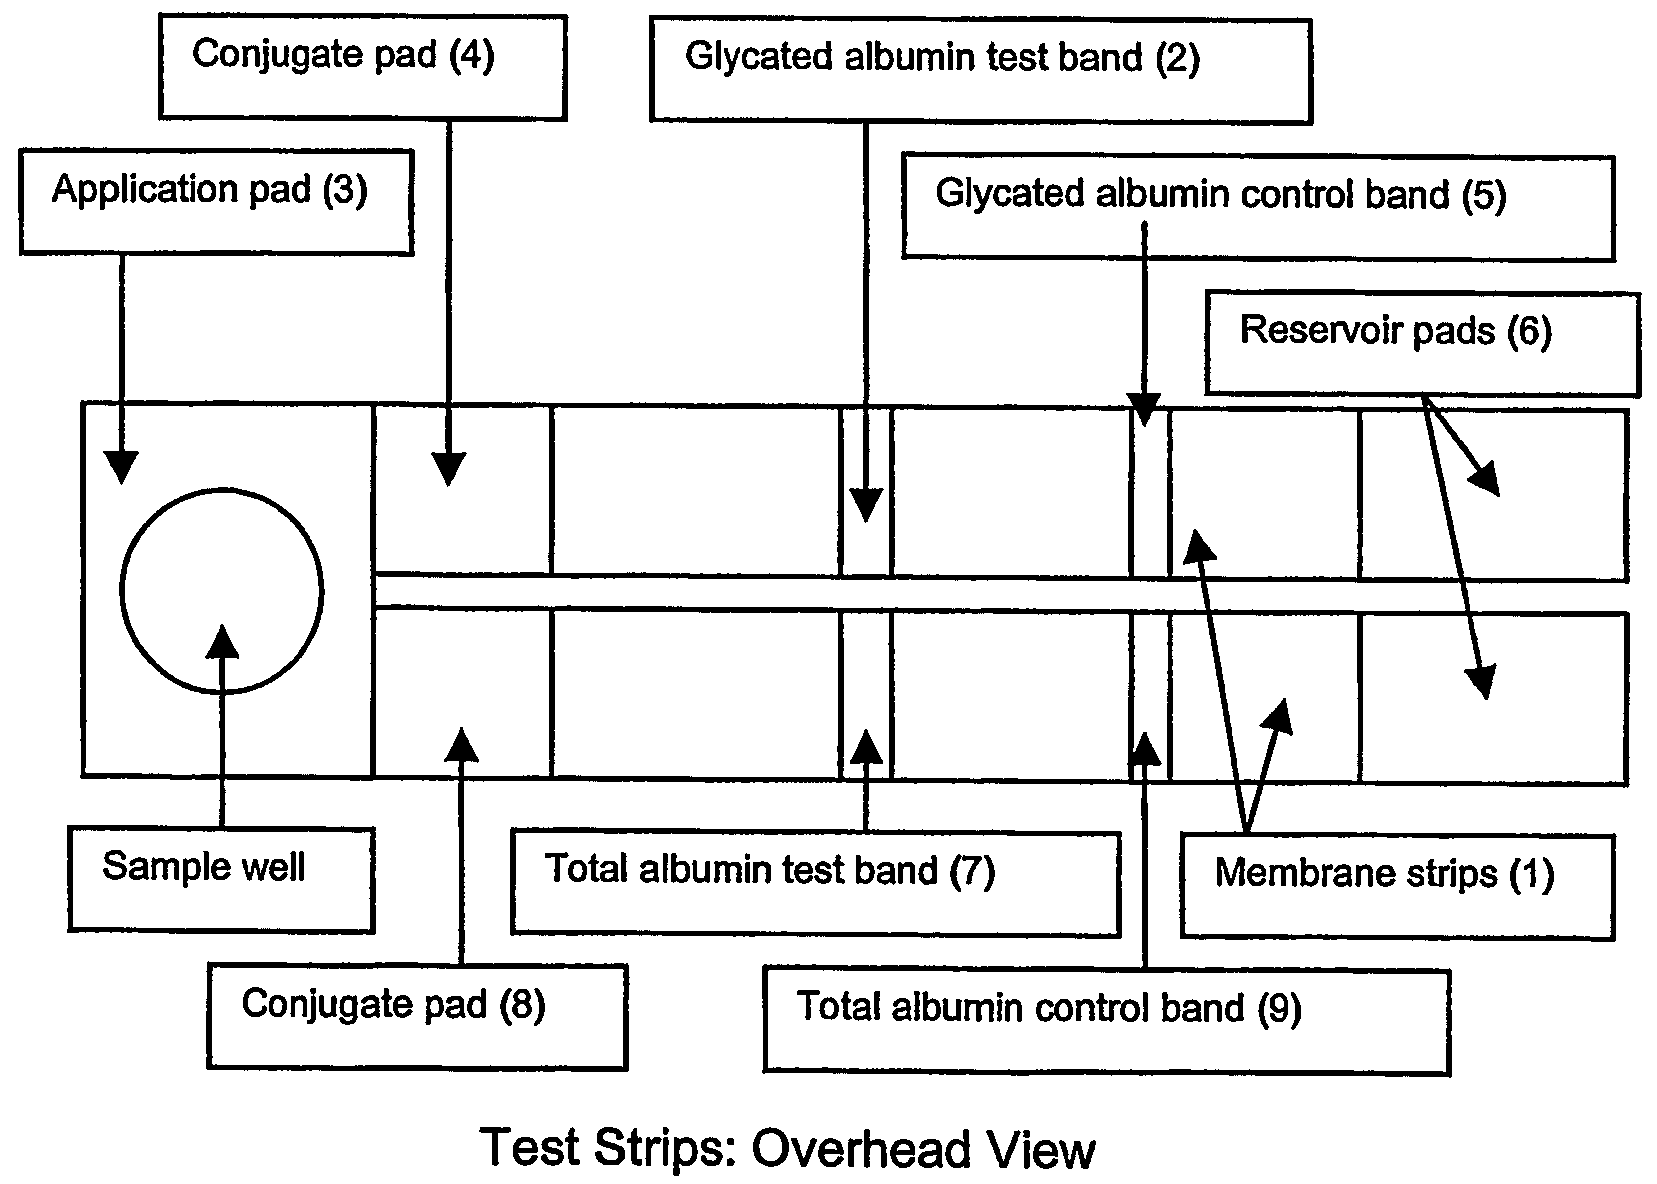 Rapid test for glycated albumin